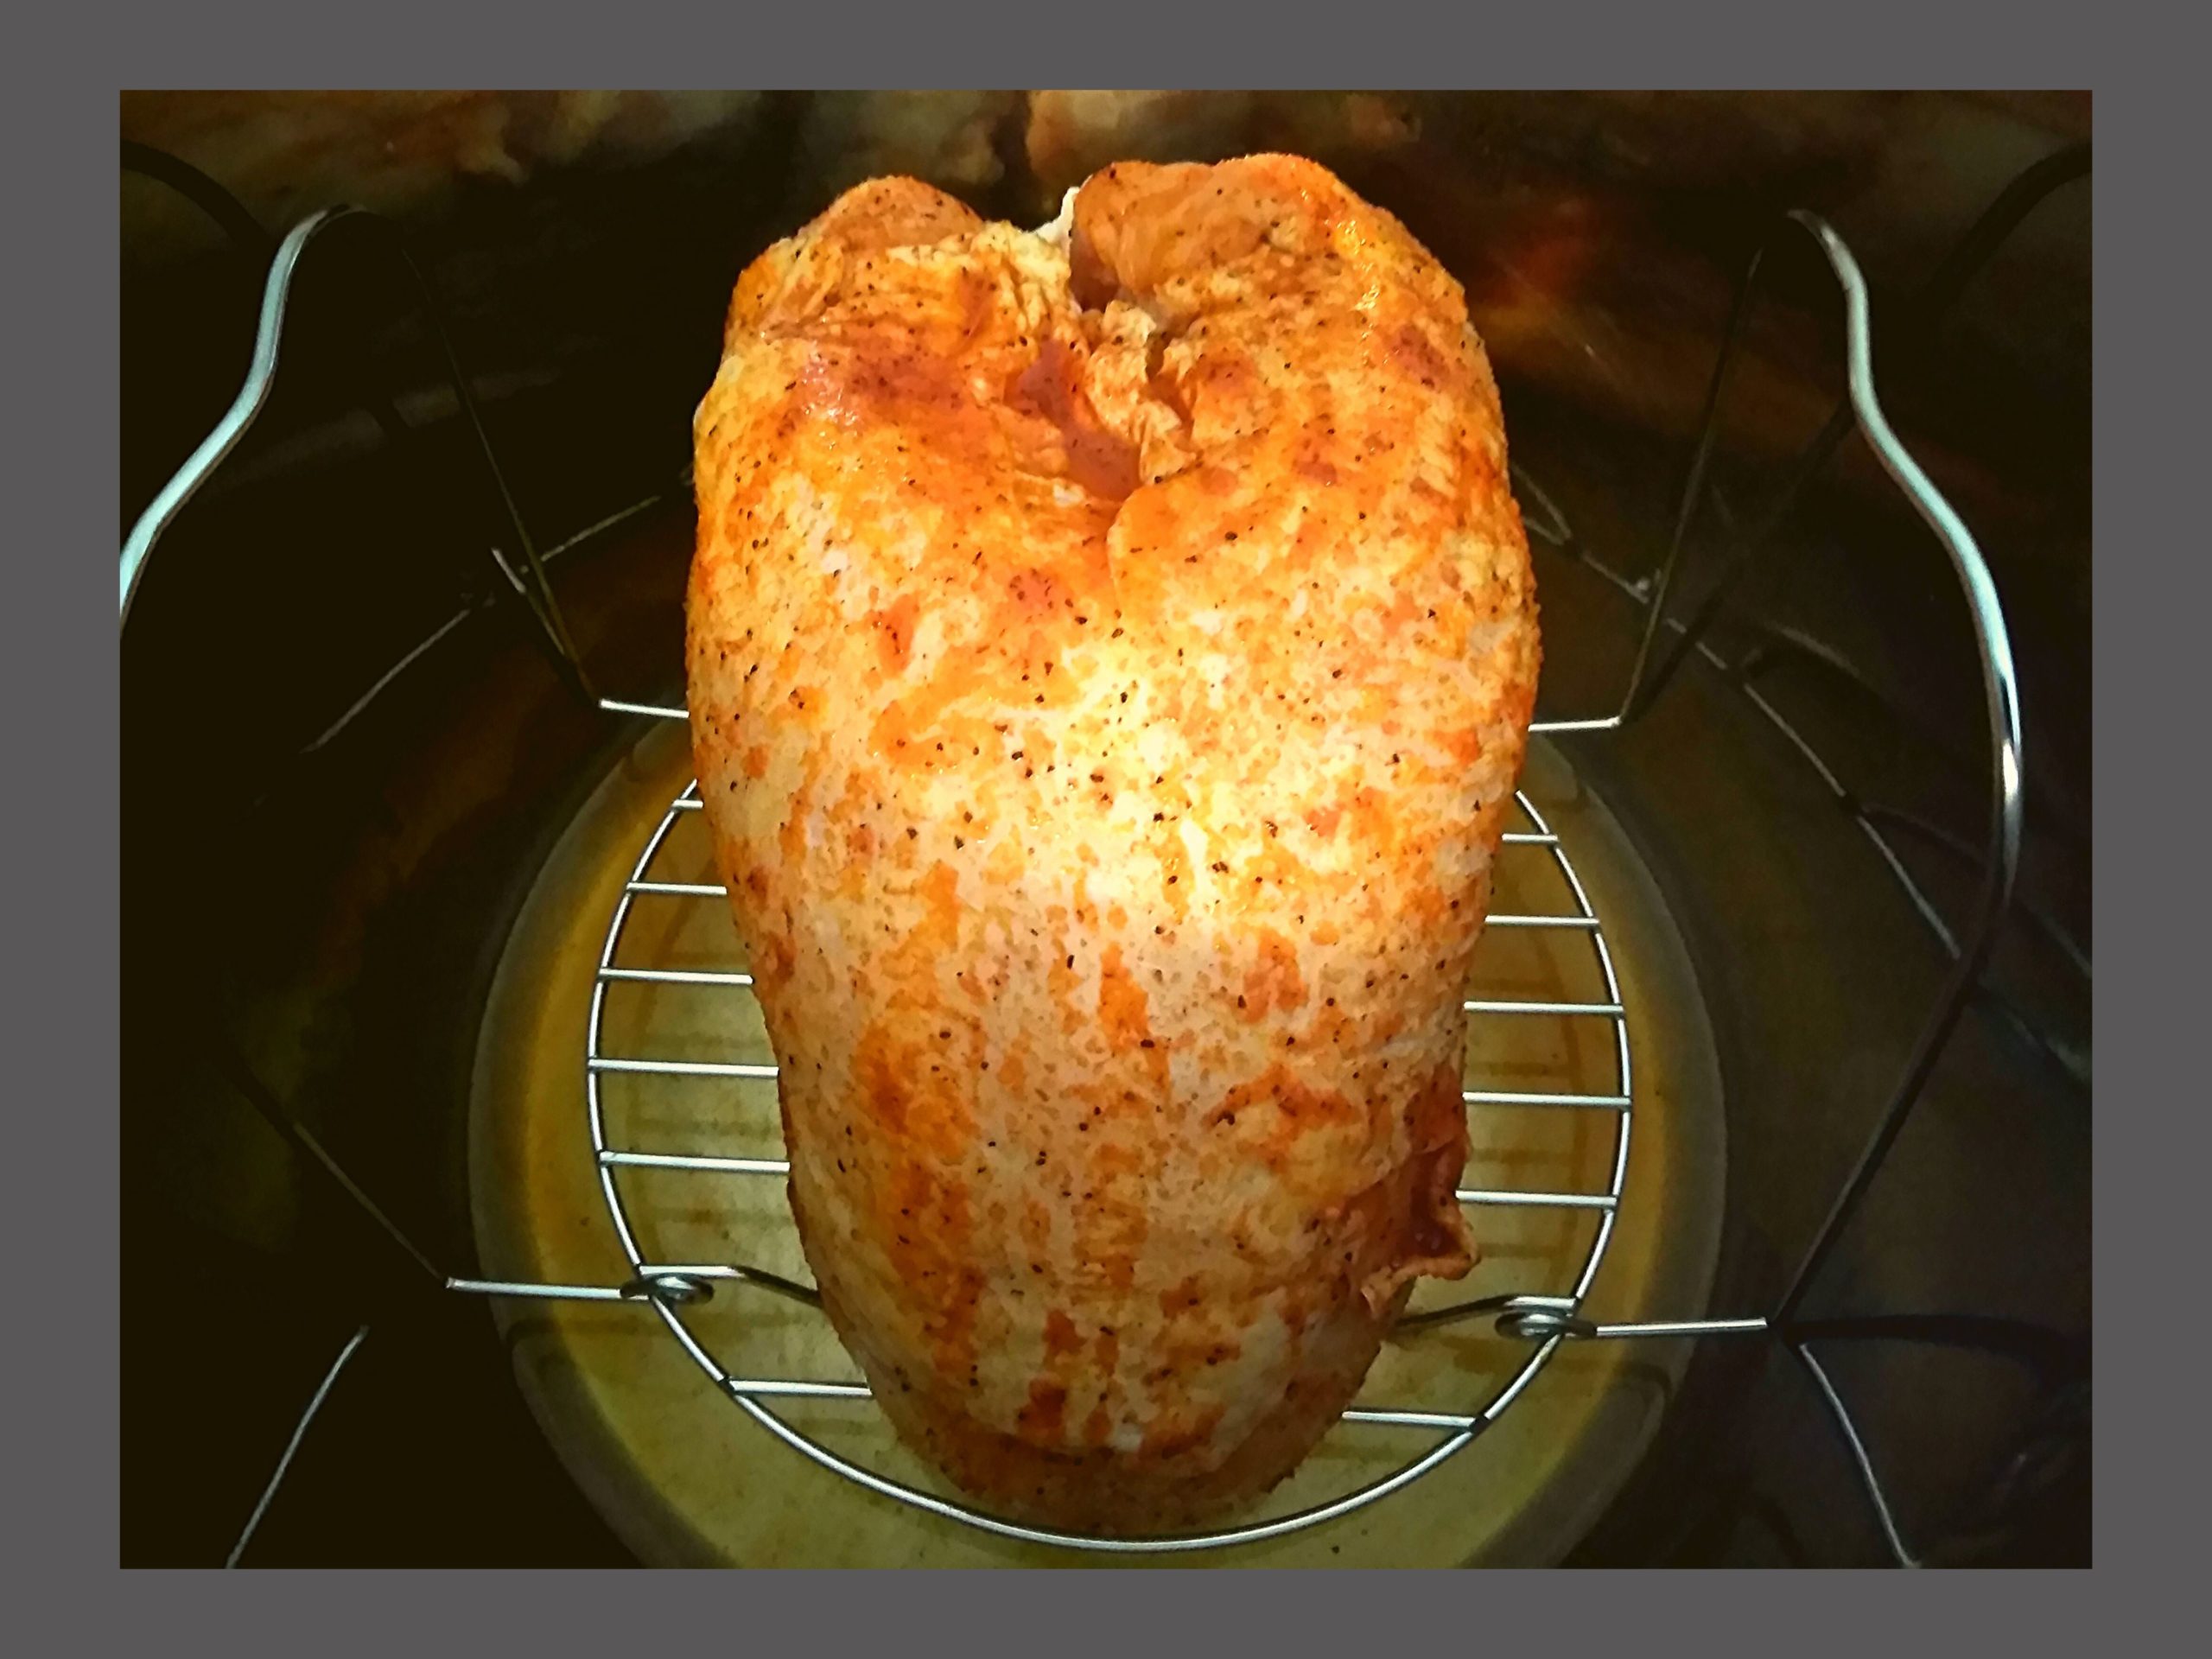 Raw Turkey breast covered in seasoning sitting on a trivet in an Instant pot.